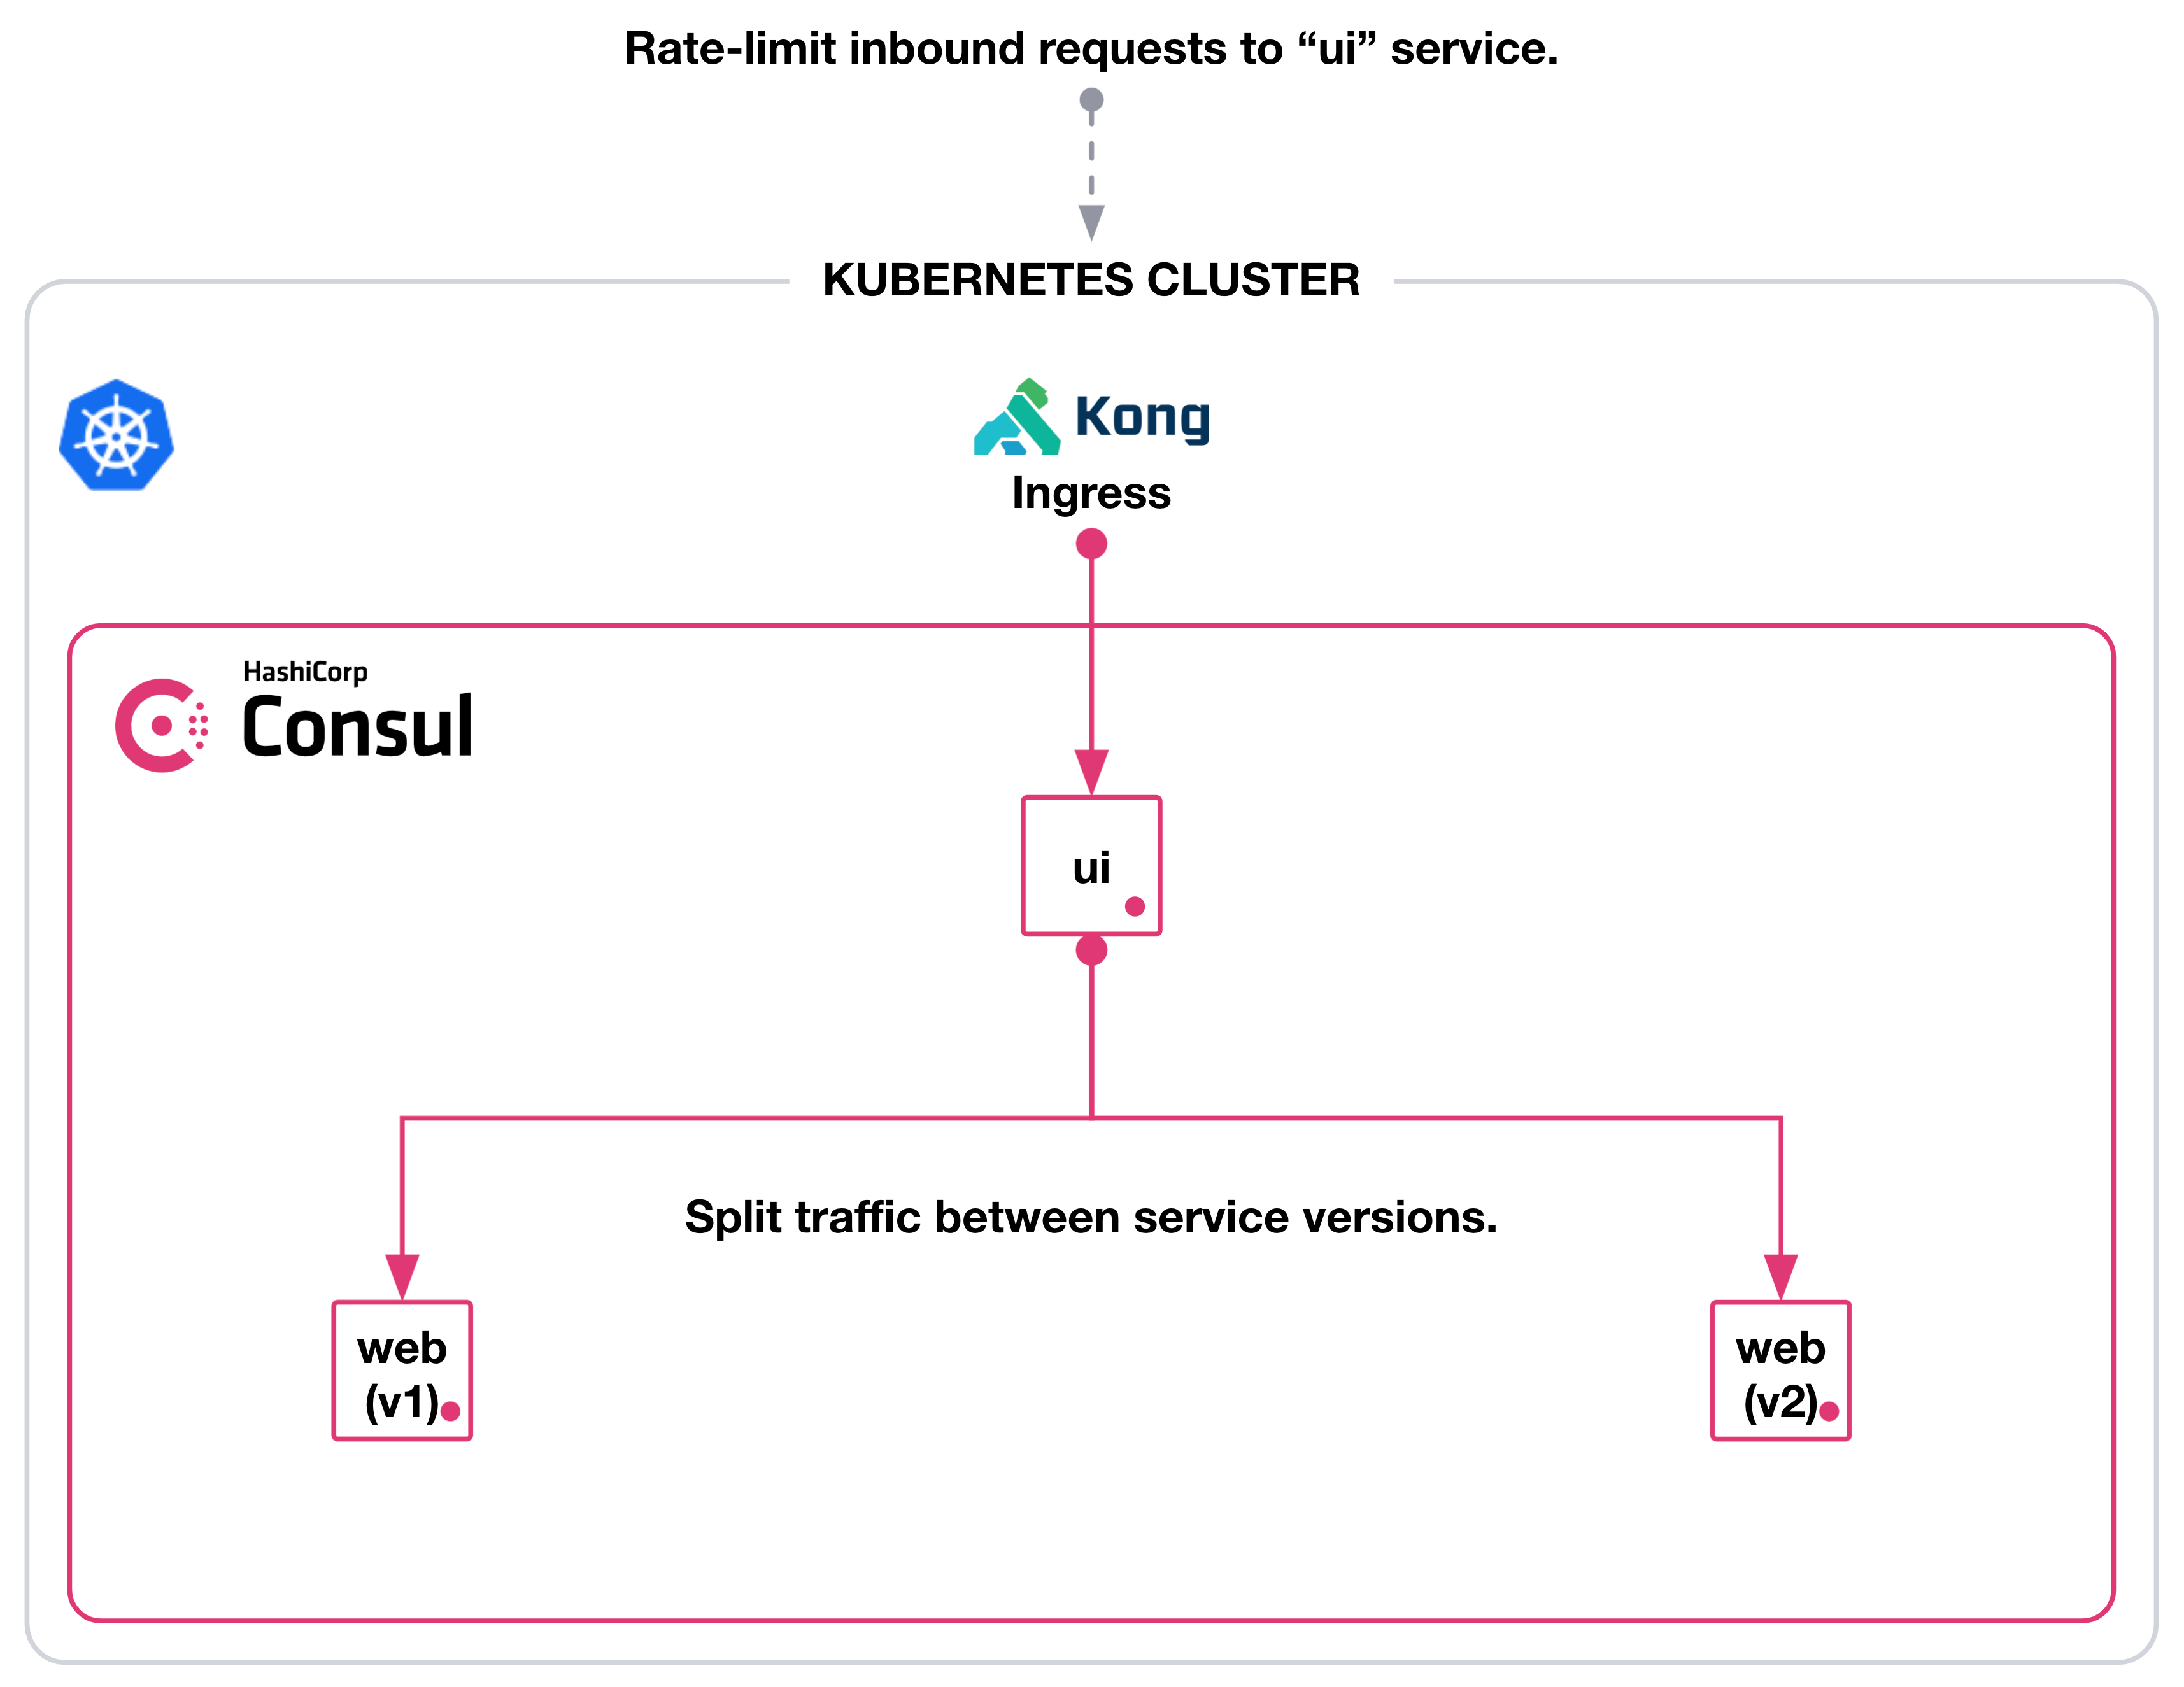 Architecture diagram of Kong ingress rate-limiting inbound requests to `ui` and Consul service mesh splitting traffic between two versions of web in a Kubernetes cluster.